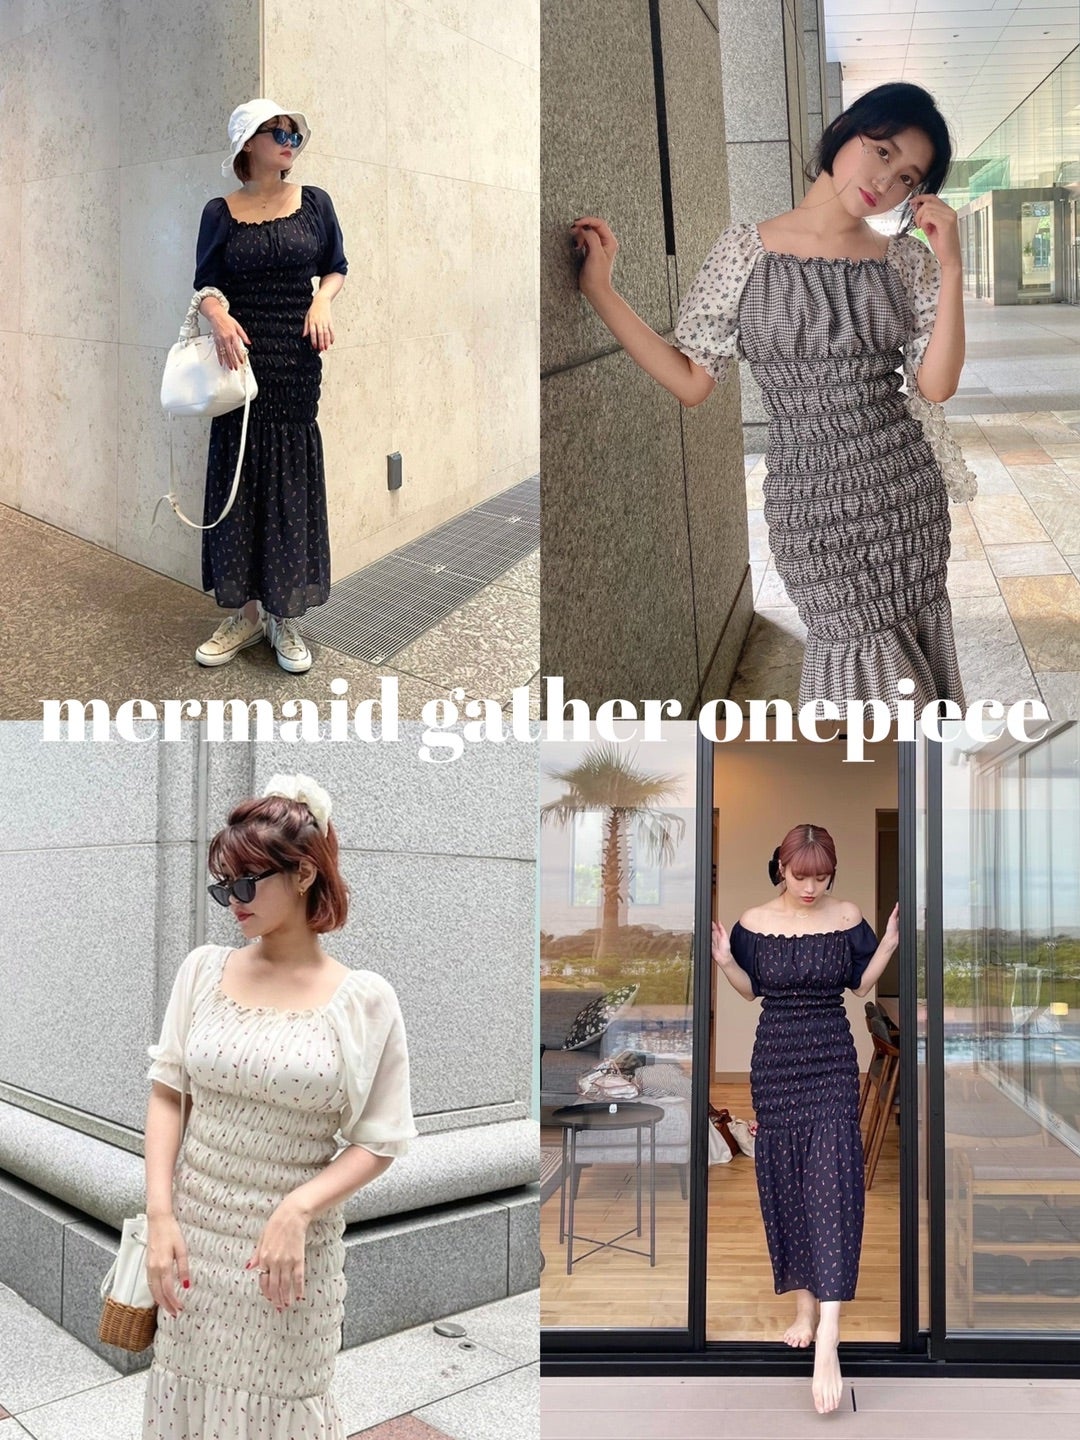 NEWワンピース❤︎mermaid gather onepiece❤︎ | épine official blog